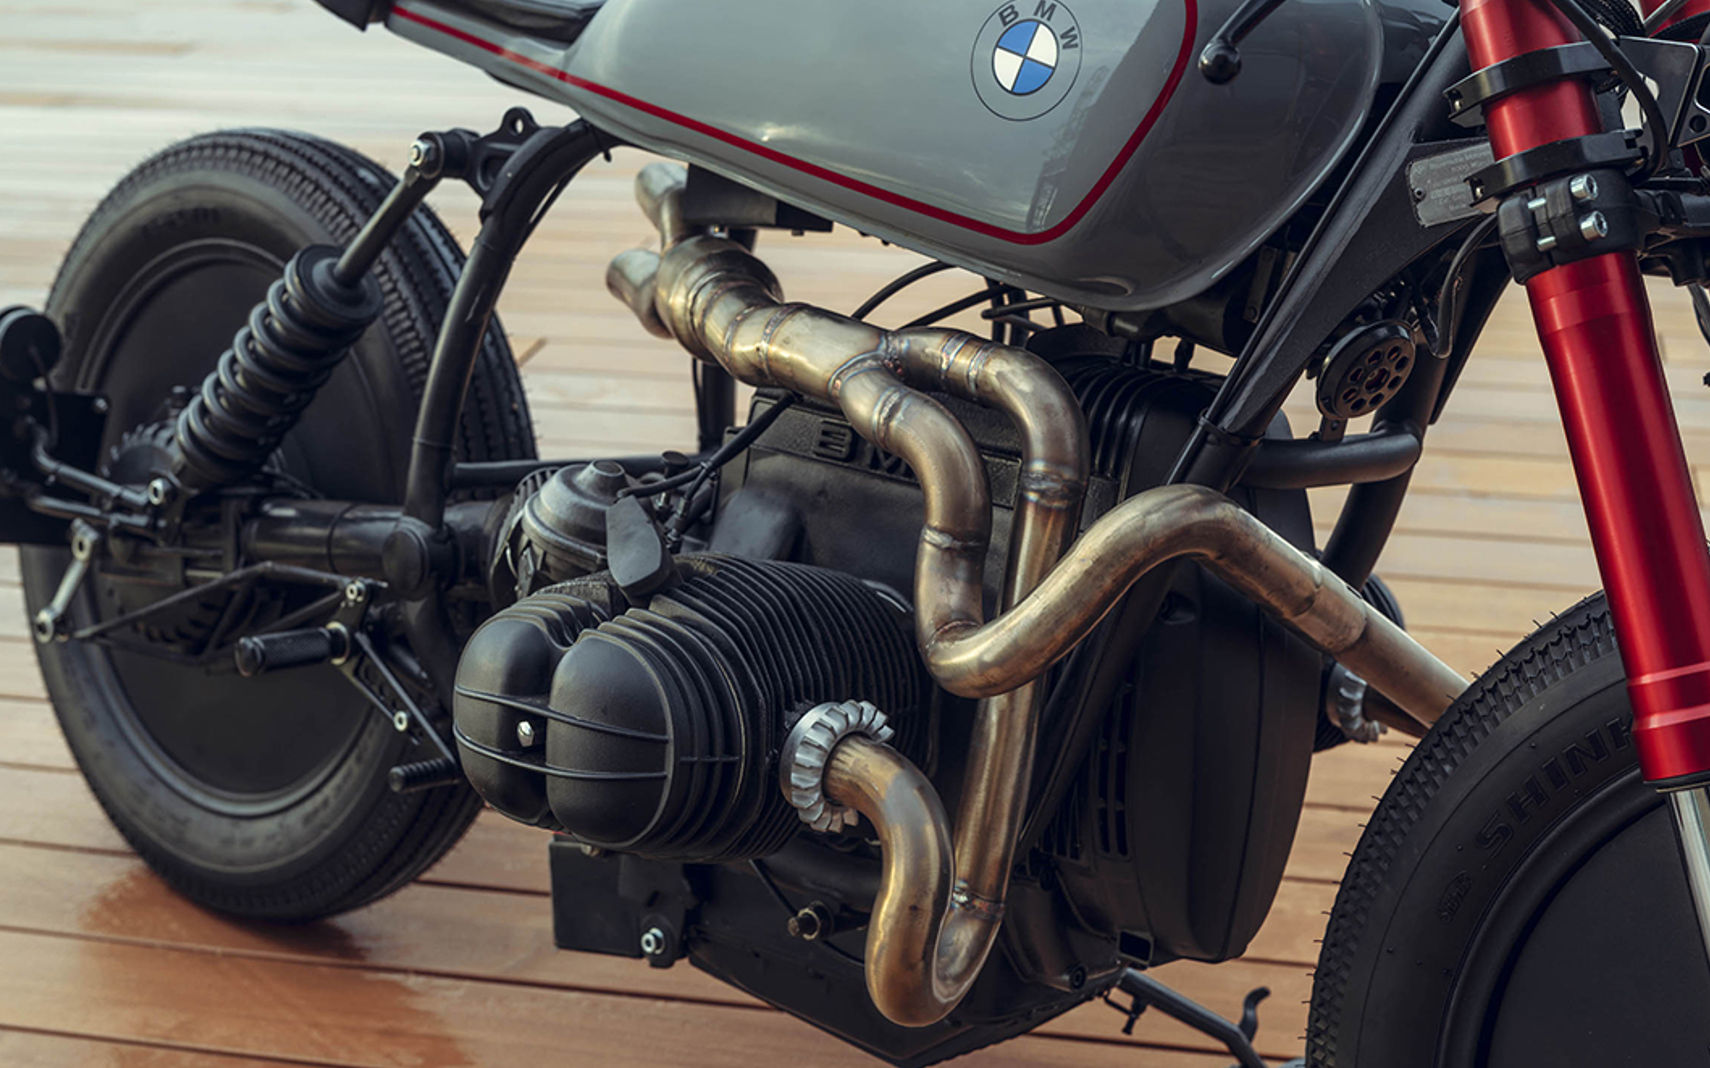 BMW R80 RT Cafe Racer by Moto Adonis